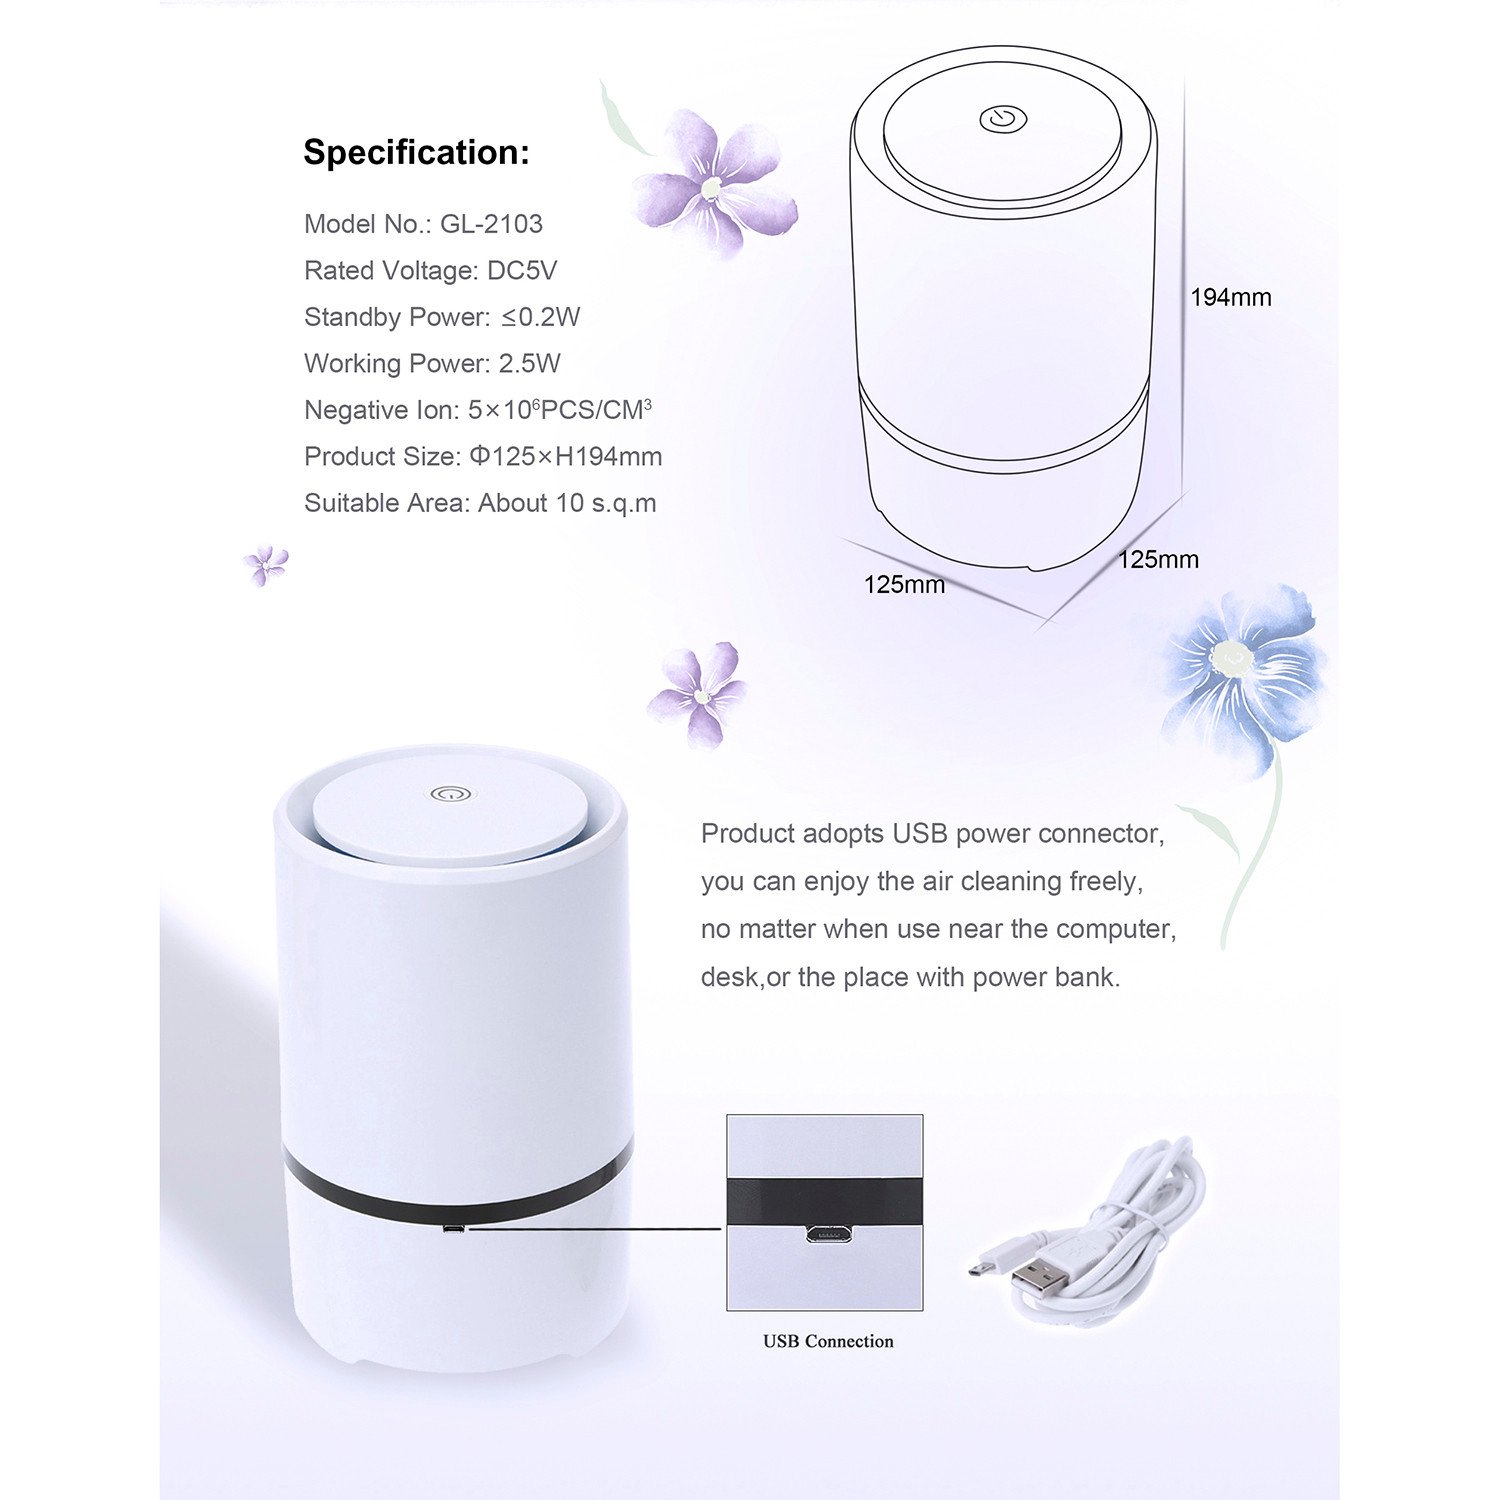 GL-203 White HEPA Filter Air Purifier Image 9